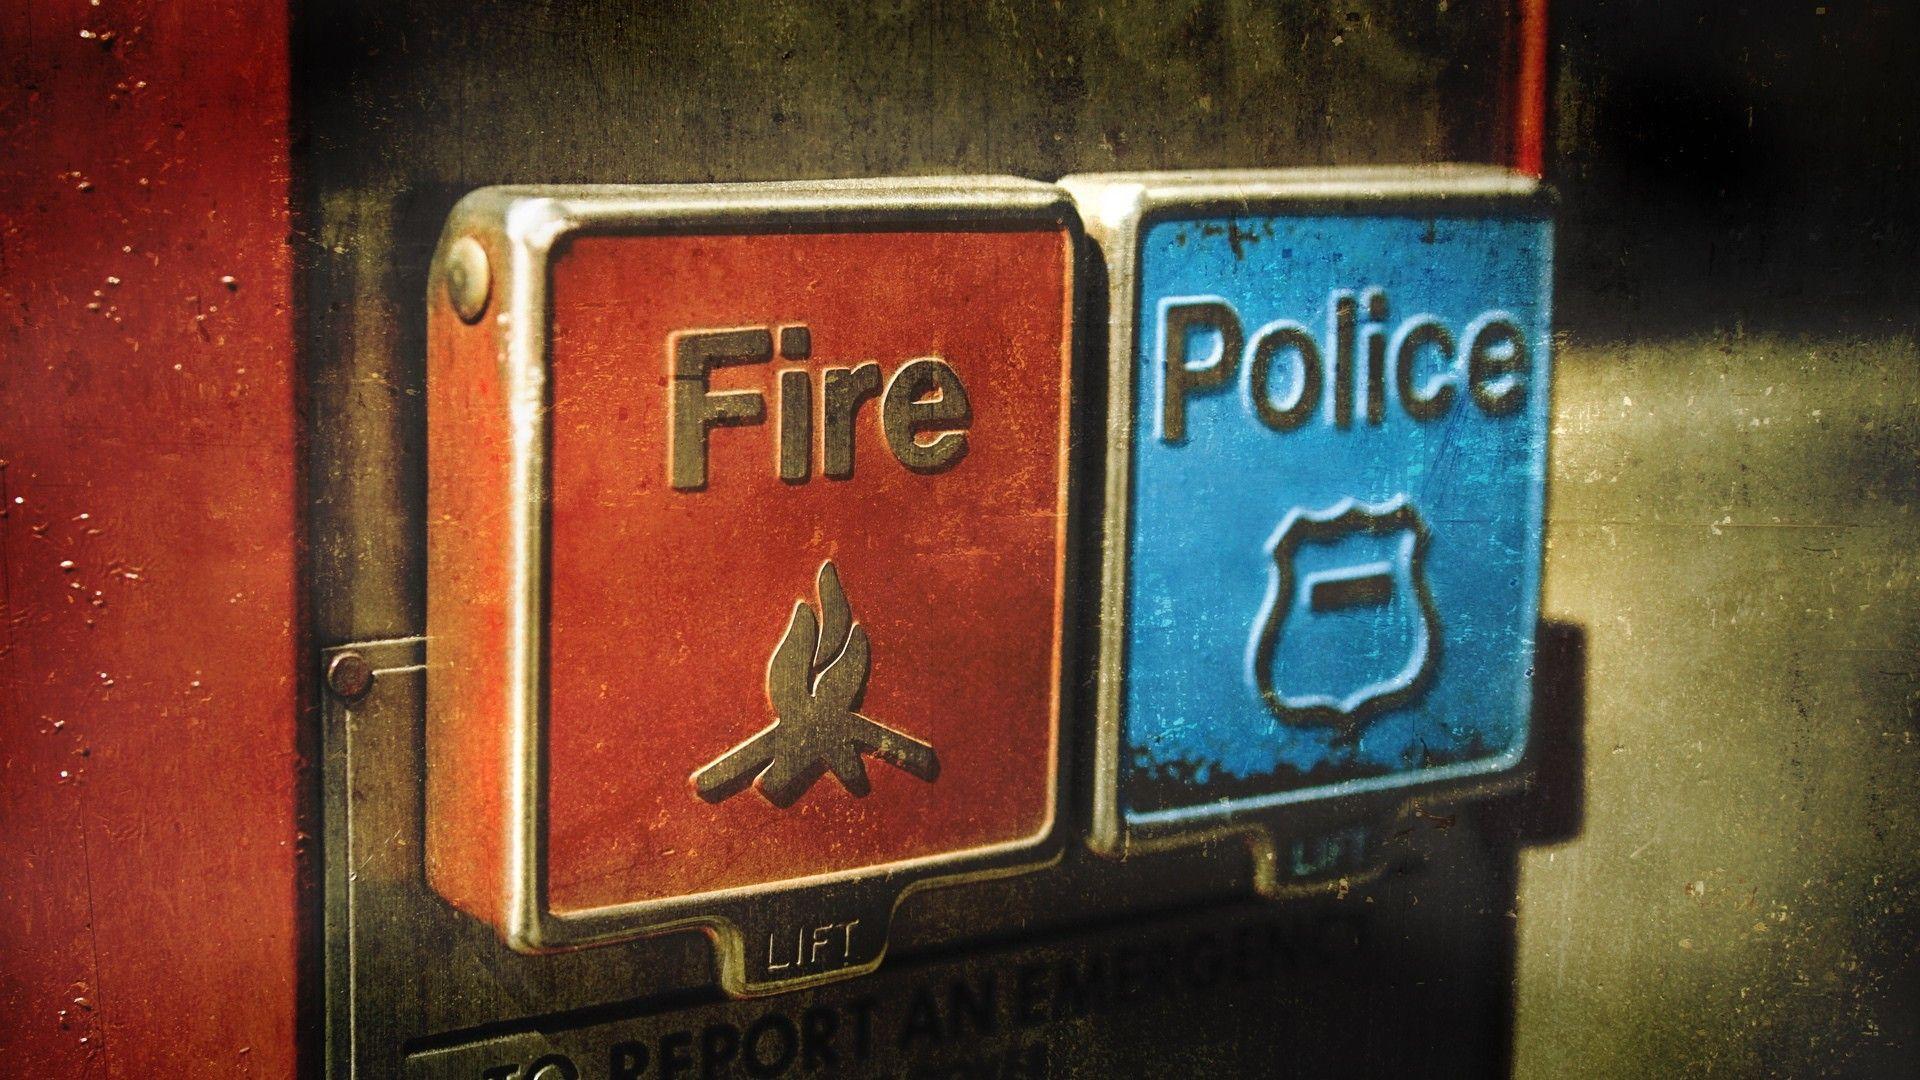 Call button firefighters and police wallpaper and image